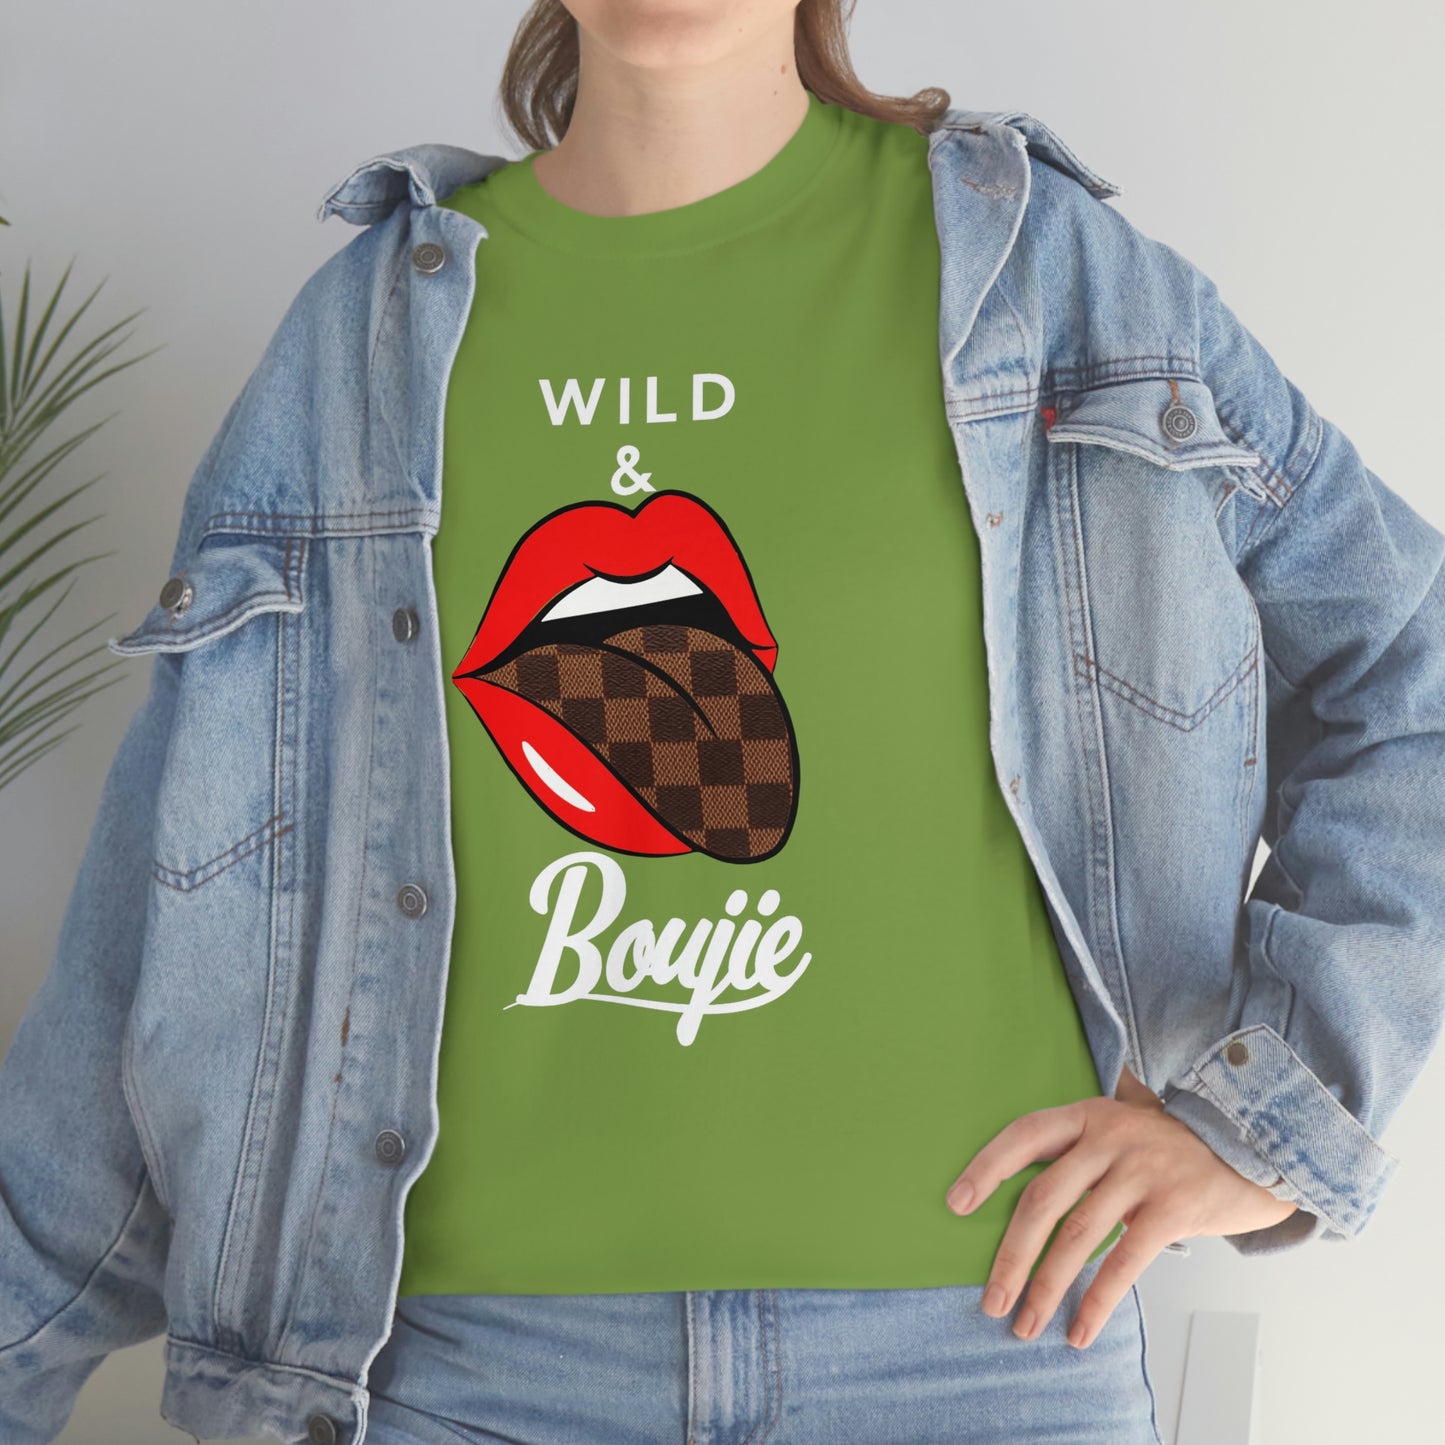 Wild and boujie red lip with white font